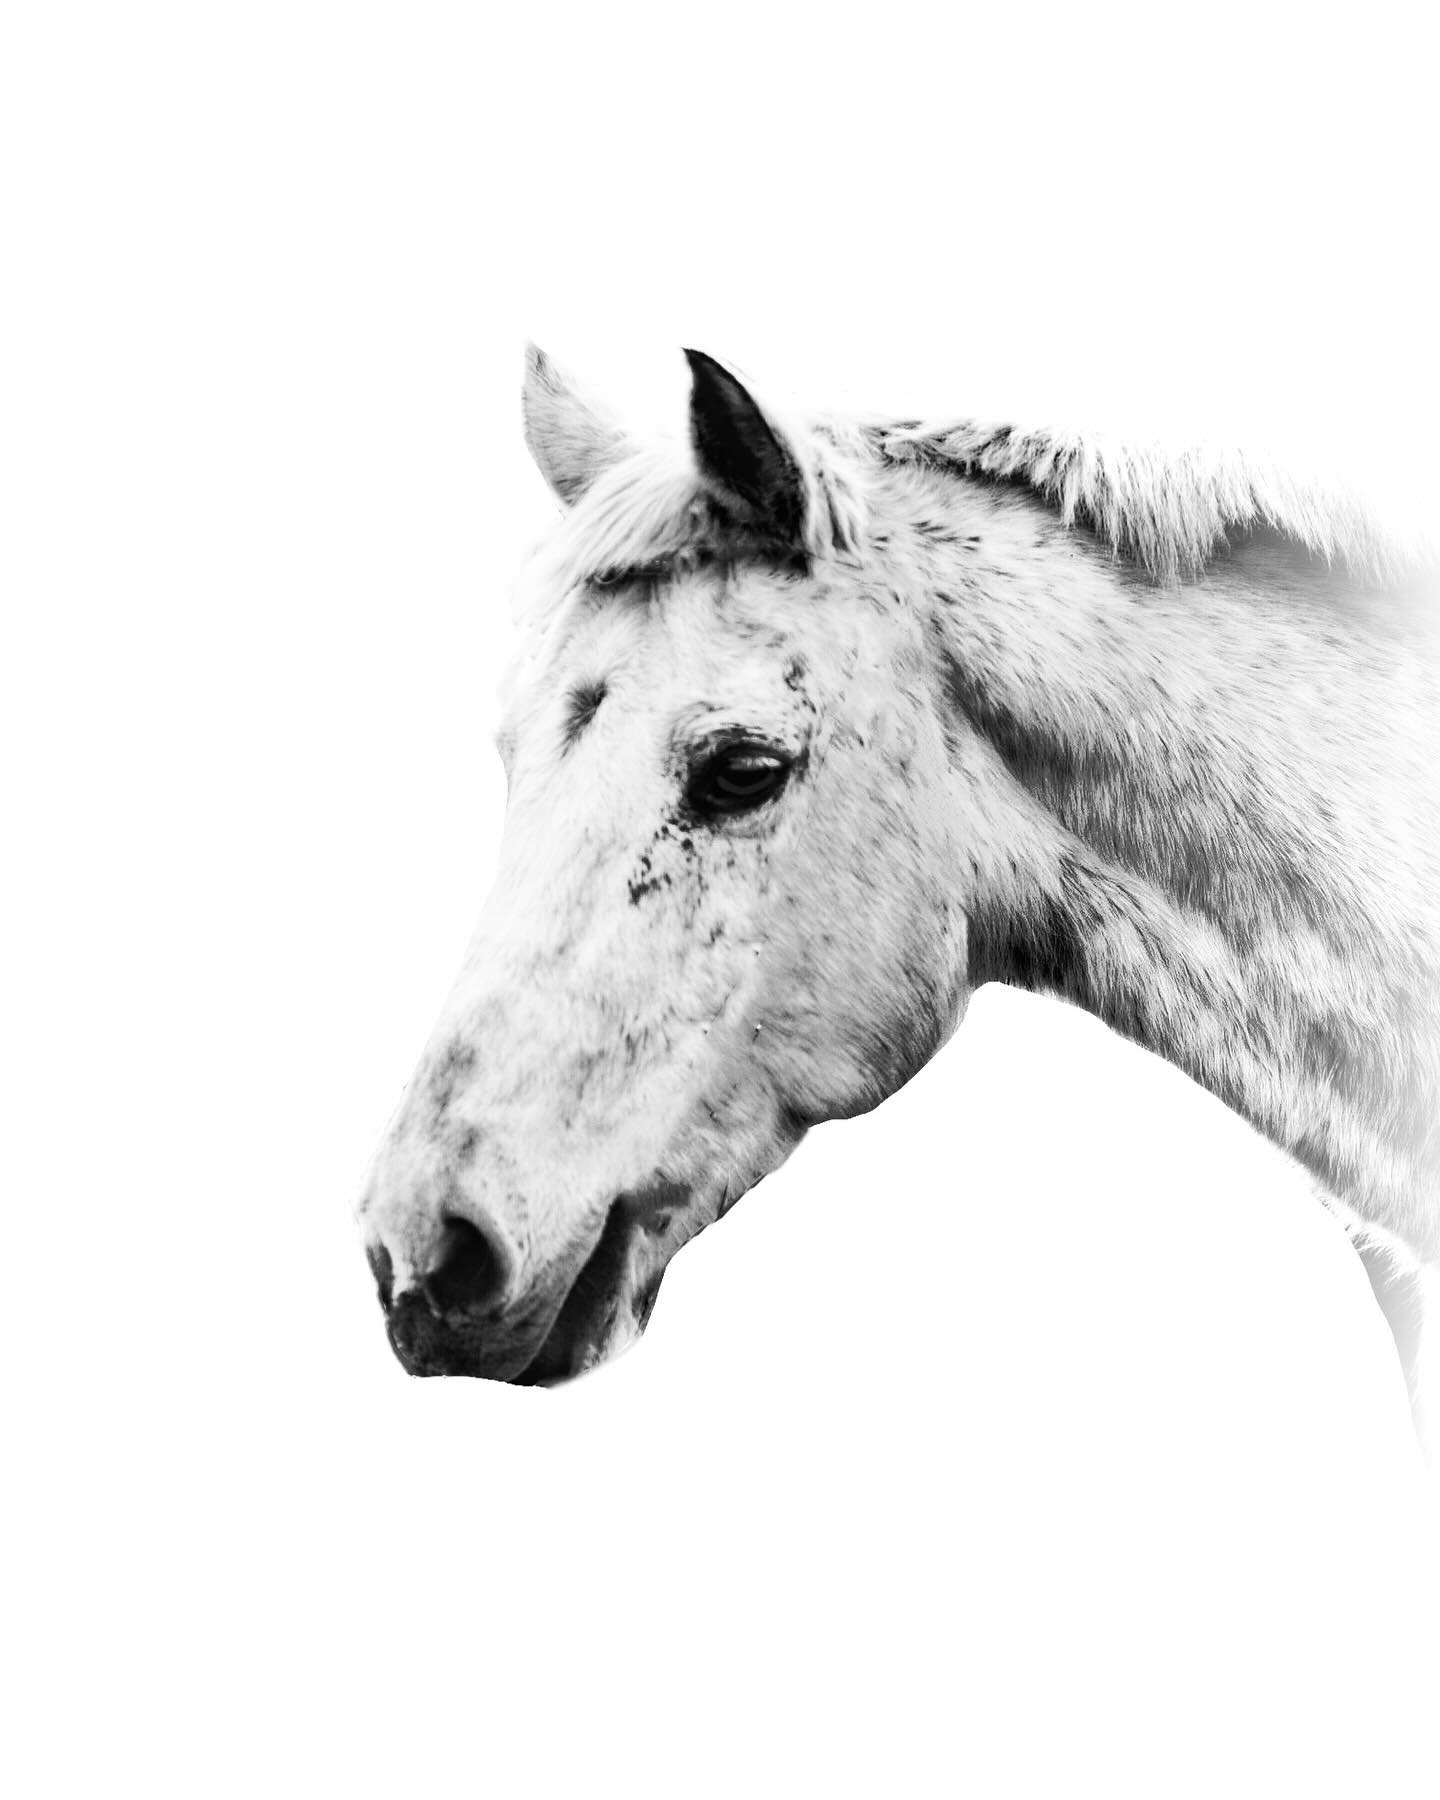 Beautiful and kind Odysseus, a sweet soul who went on to the pasture in the sky. He was a therapy horse who helped children and adults with autism at Wilderwood Equine Therapy center. 💕🐎🪽

For more information on equine portraits visit www.cheyenn